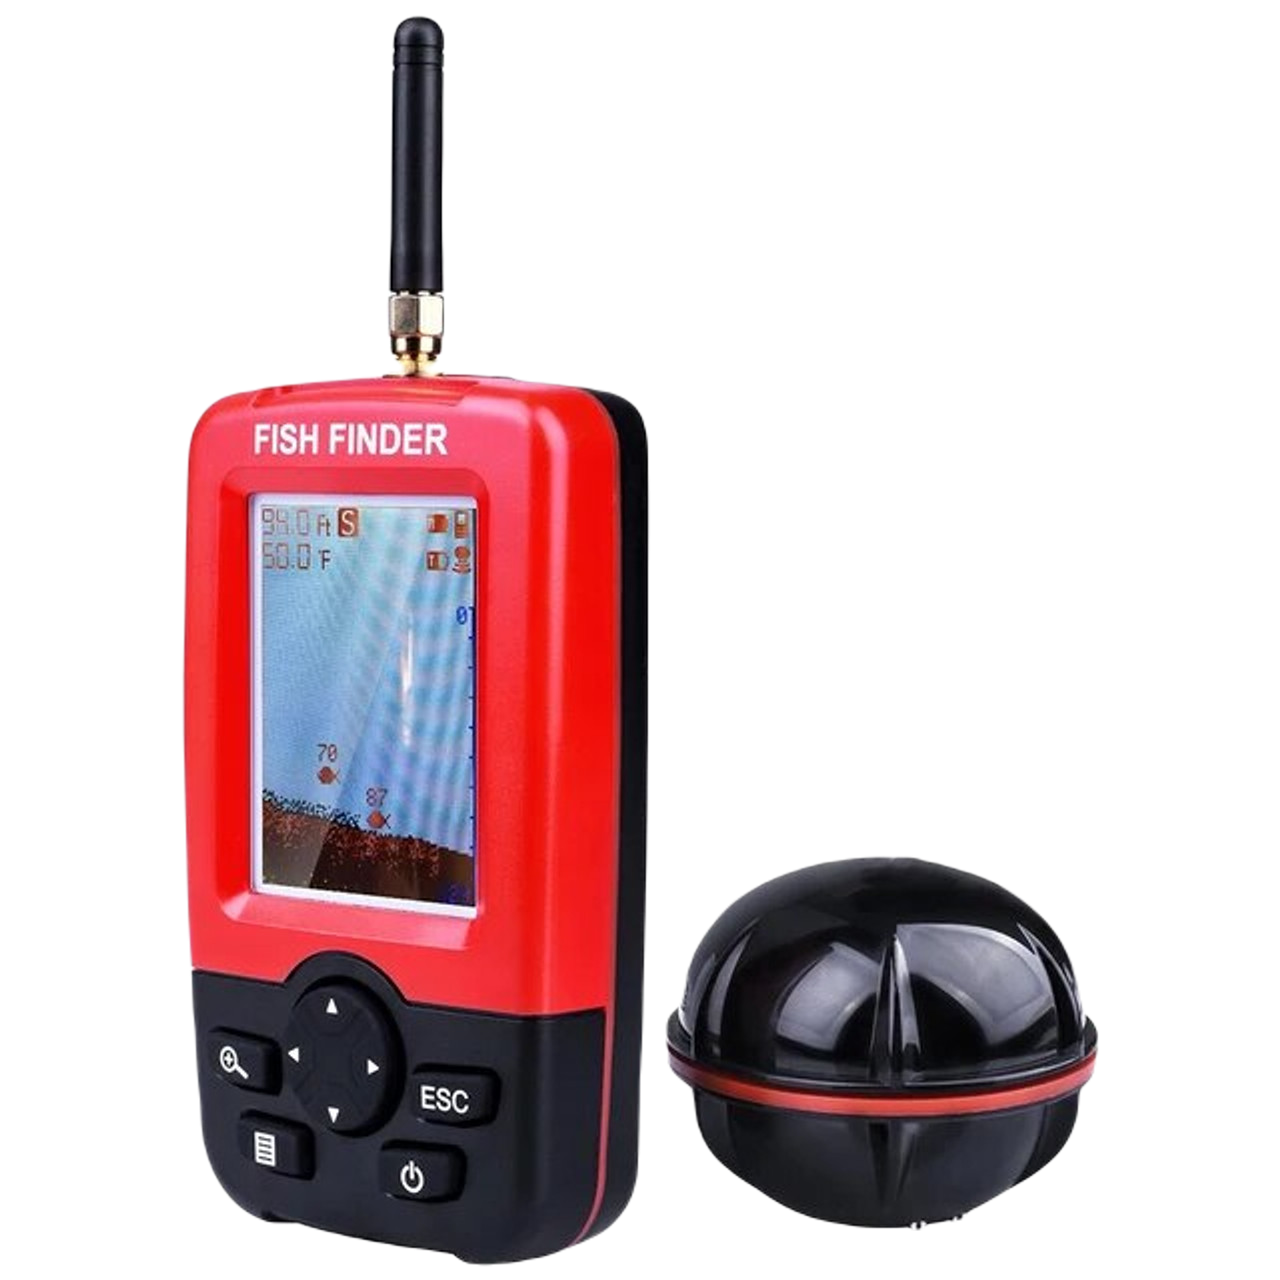 What is the Best Wireless Portable Fish Finder?